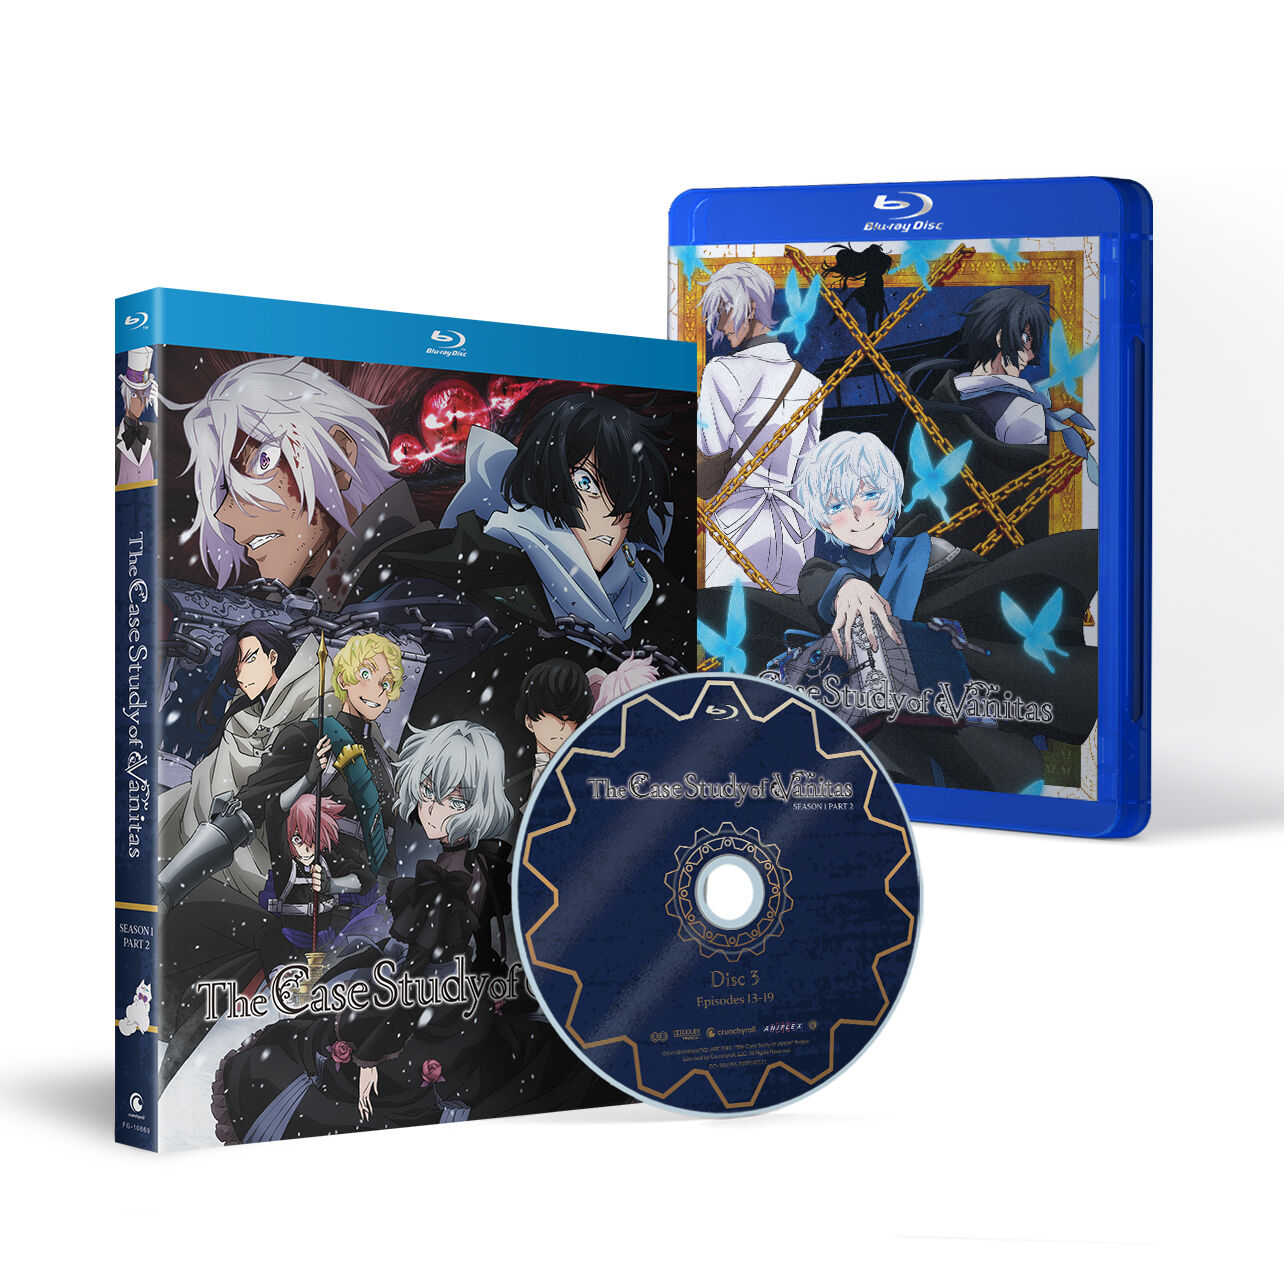 Official Anime Blu-ray and Box Sets | Crunchyroll Store